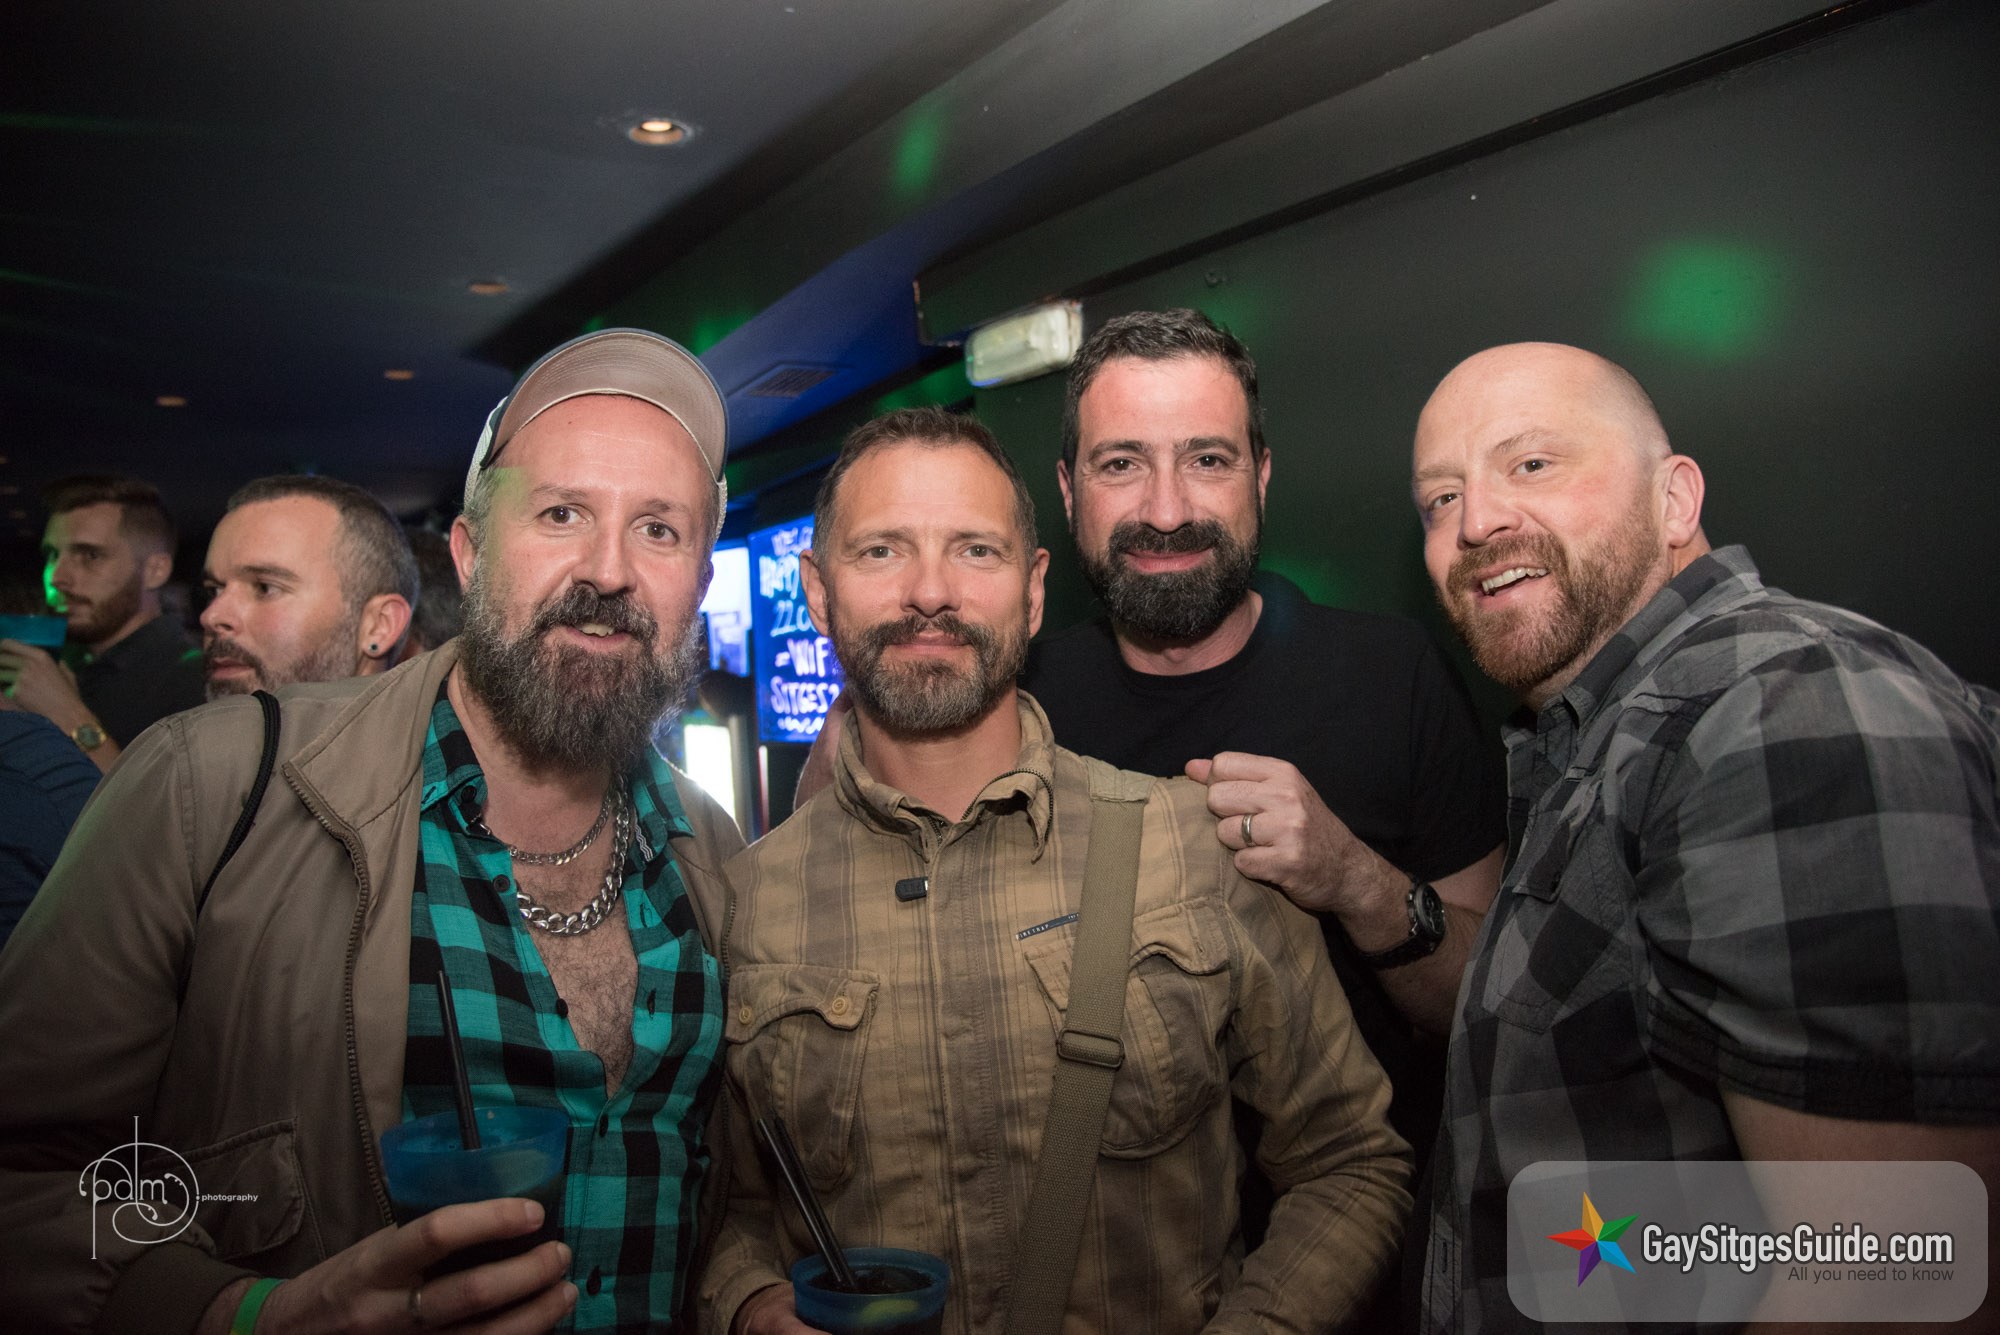 Bears Week Sitges, May Edition Gallery 2 Gay Sitges Guide